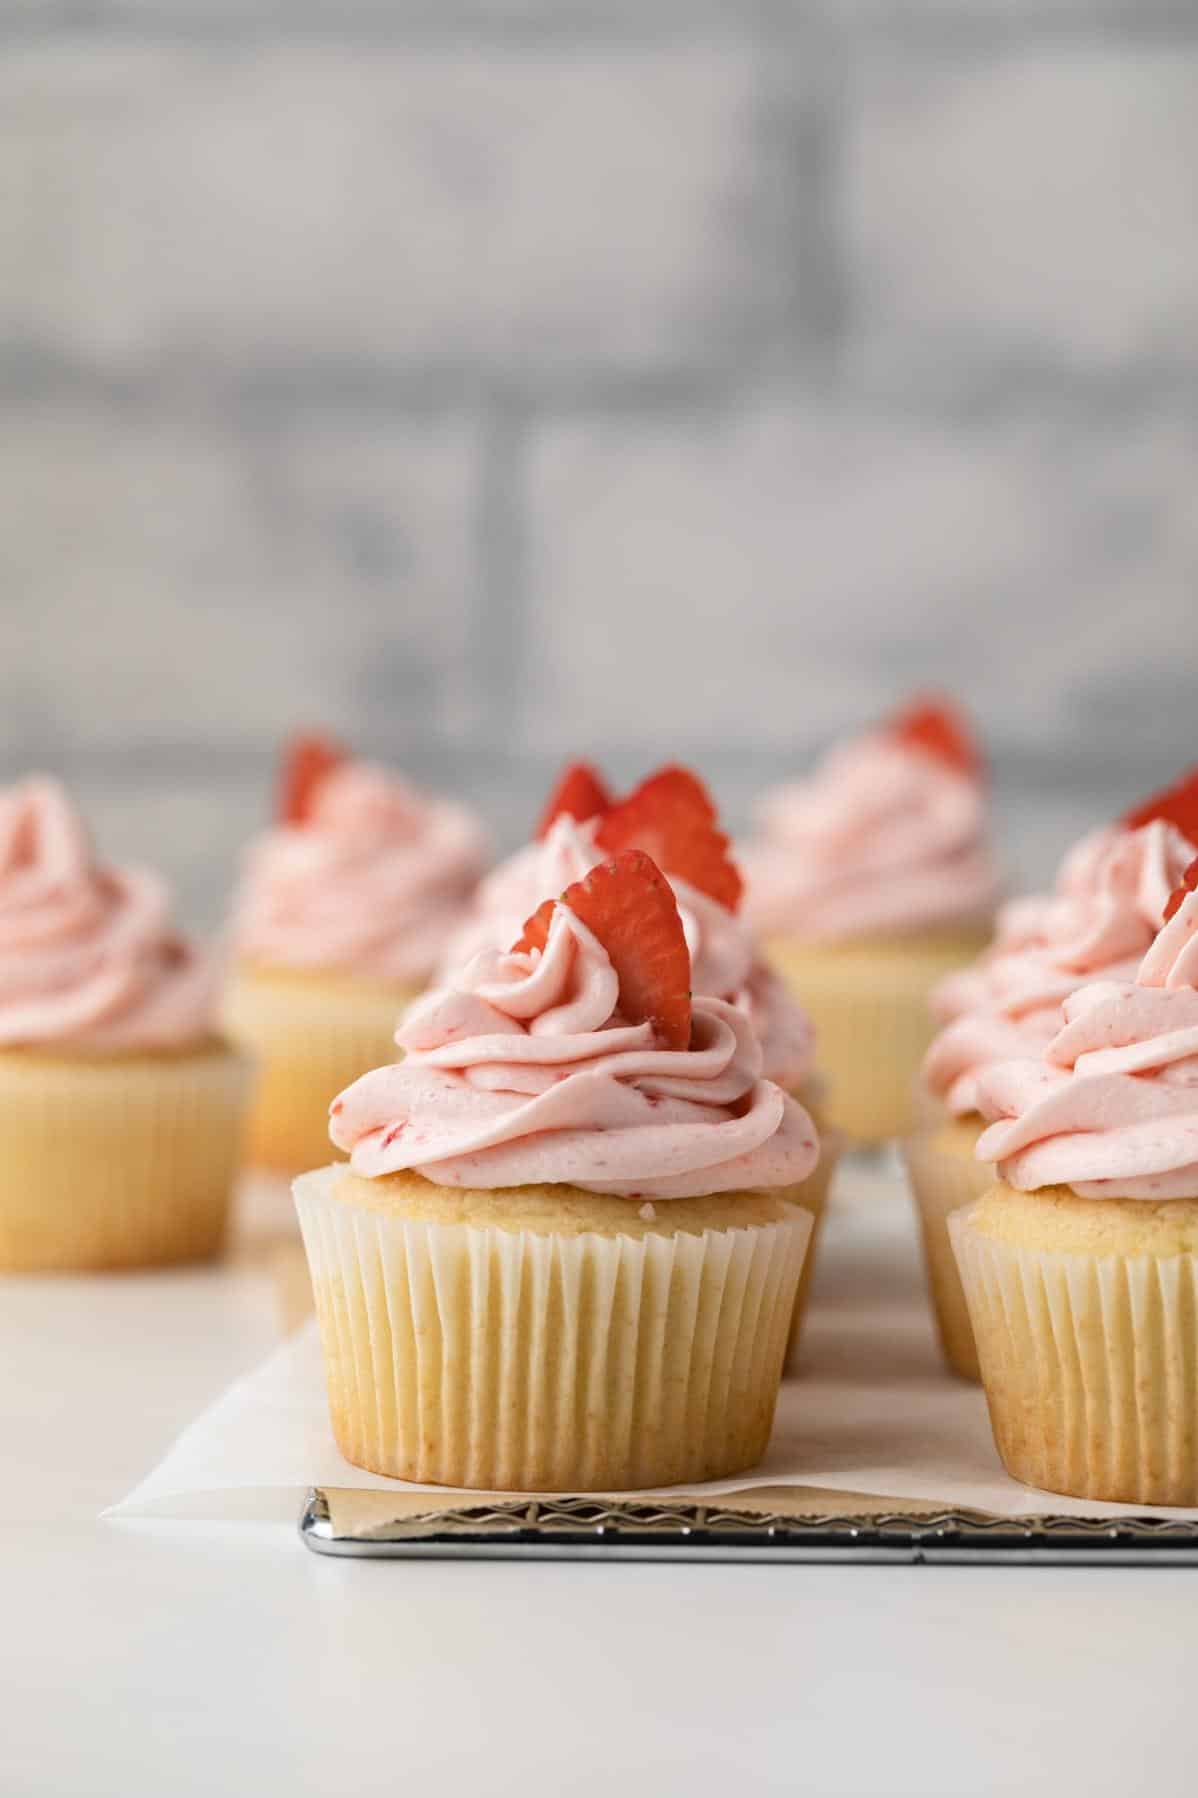  I guarantee you won't be able to eat just one of these scrumptious cupcakes!